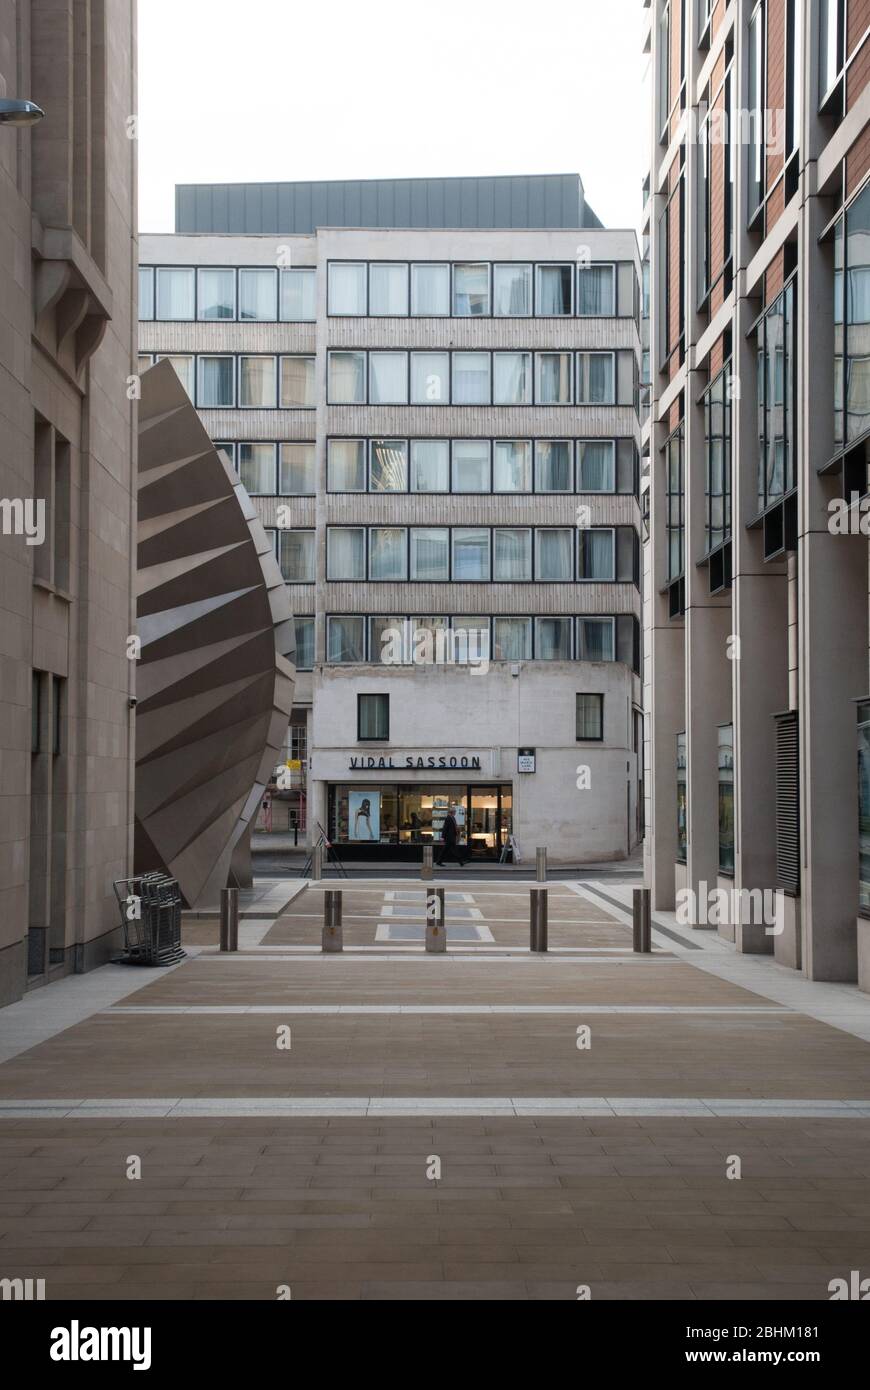 Angels Wings Paternoster Vents Substation Vents Stainless Steel Paternoster Square., London EC4M 7BP by Thomas Heatherwick Studio Stock Photo